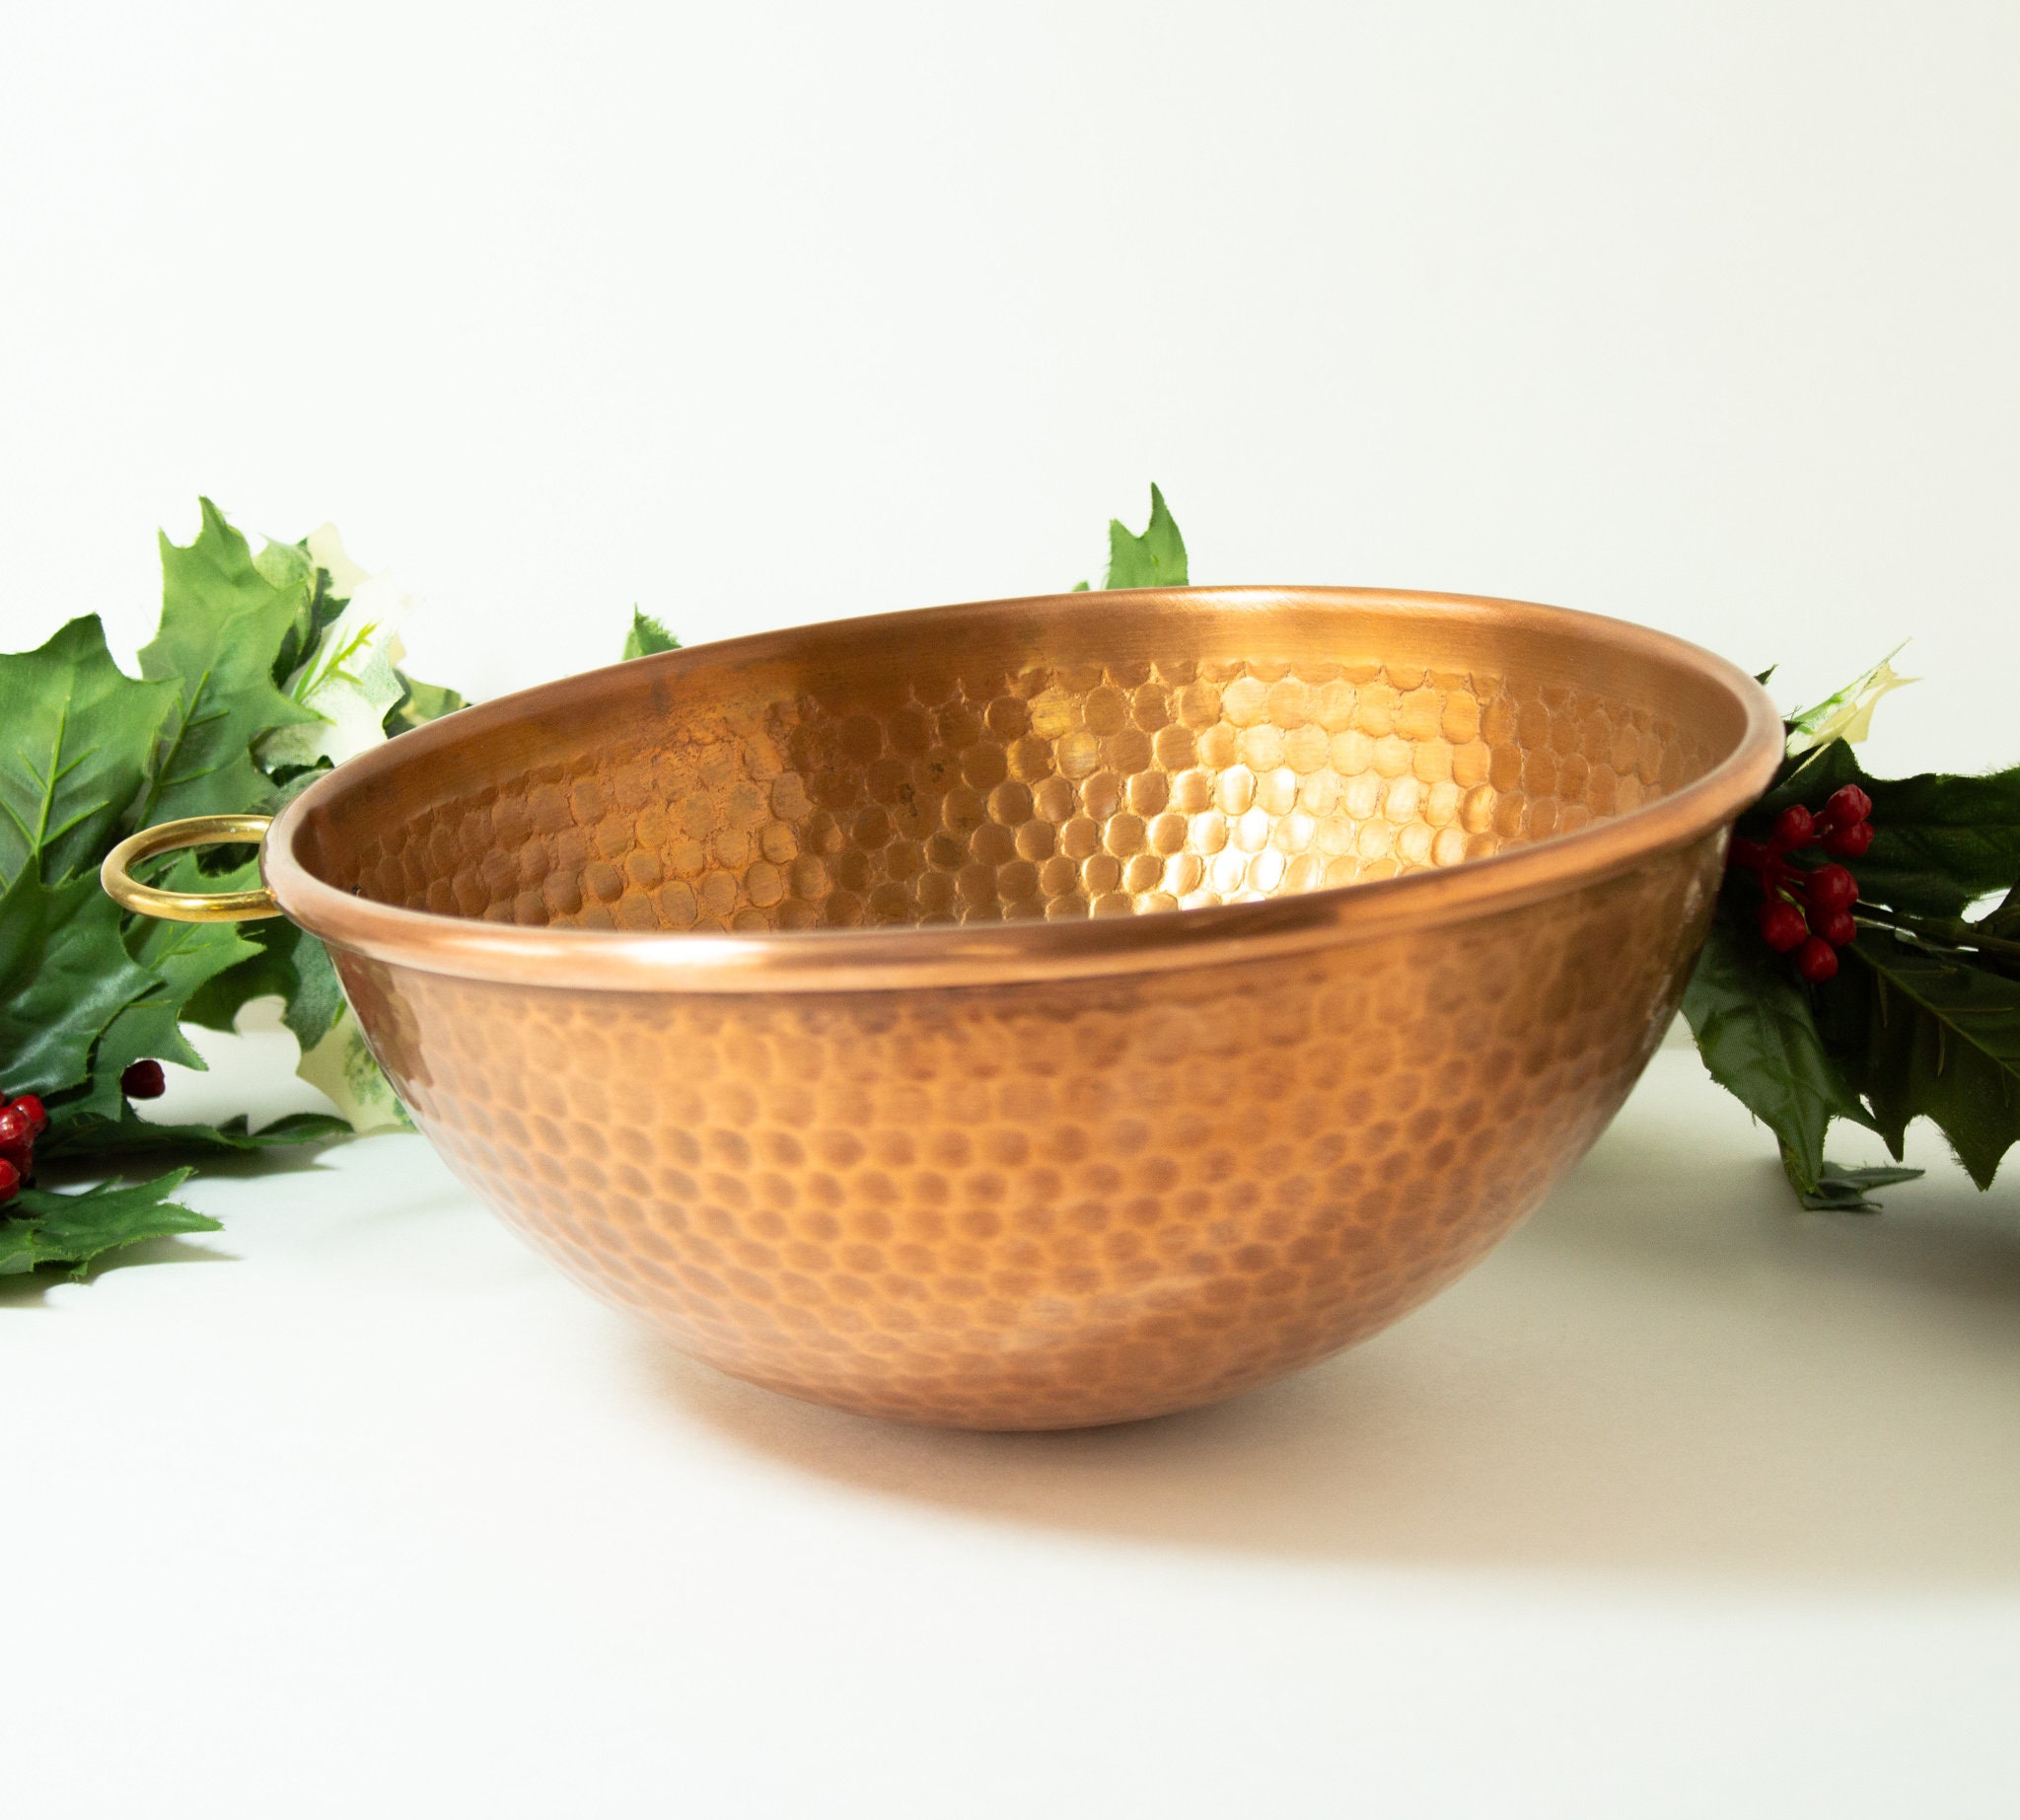 Vintage 7” Solid Flat Bottom Copper Mixing Bowl With Single Brass Ring